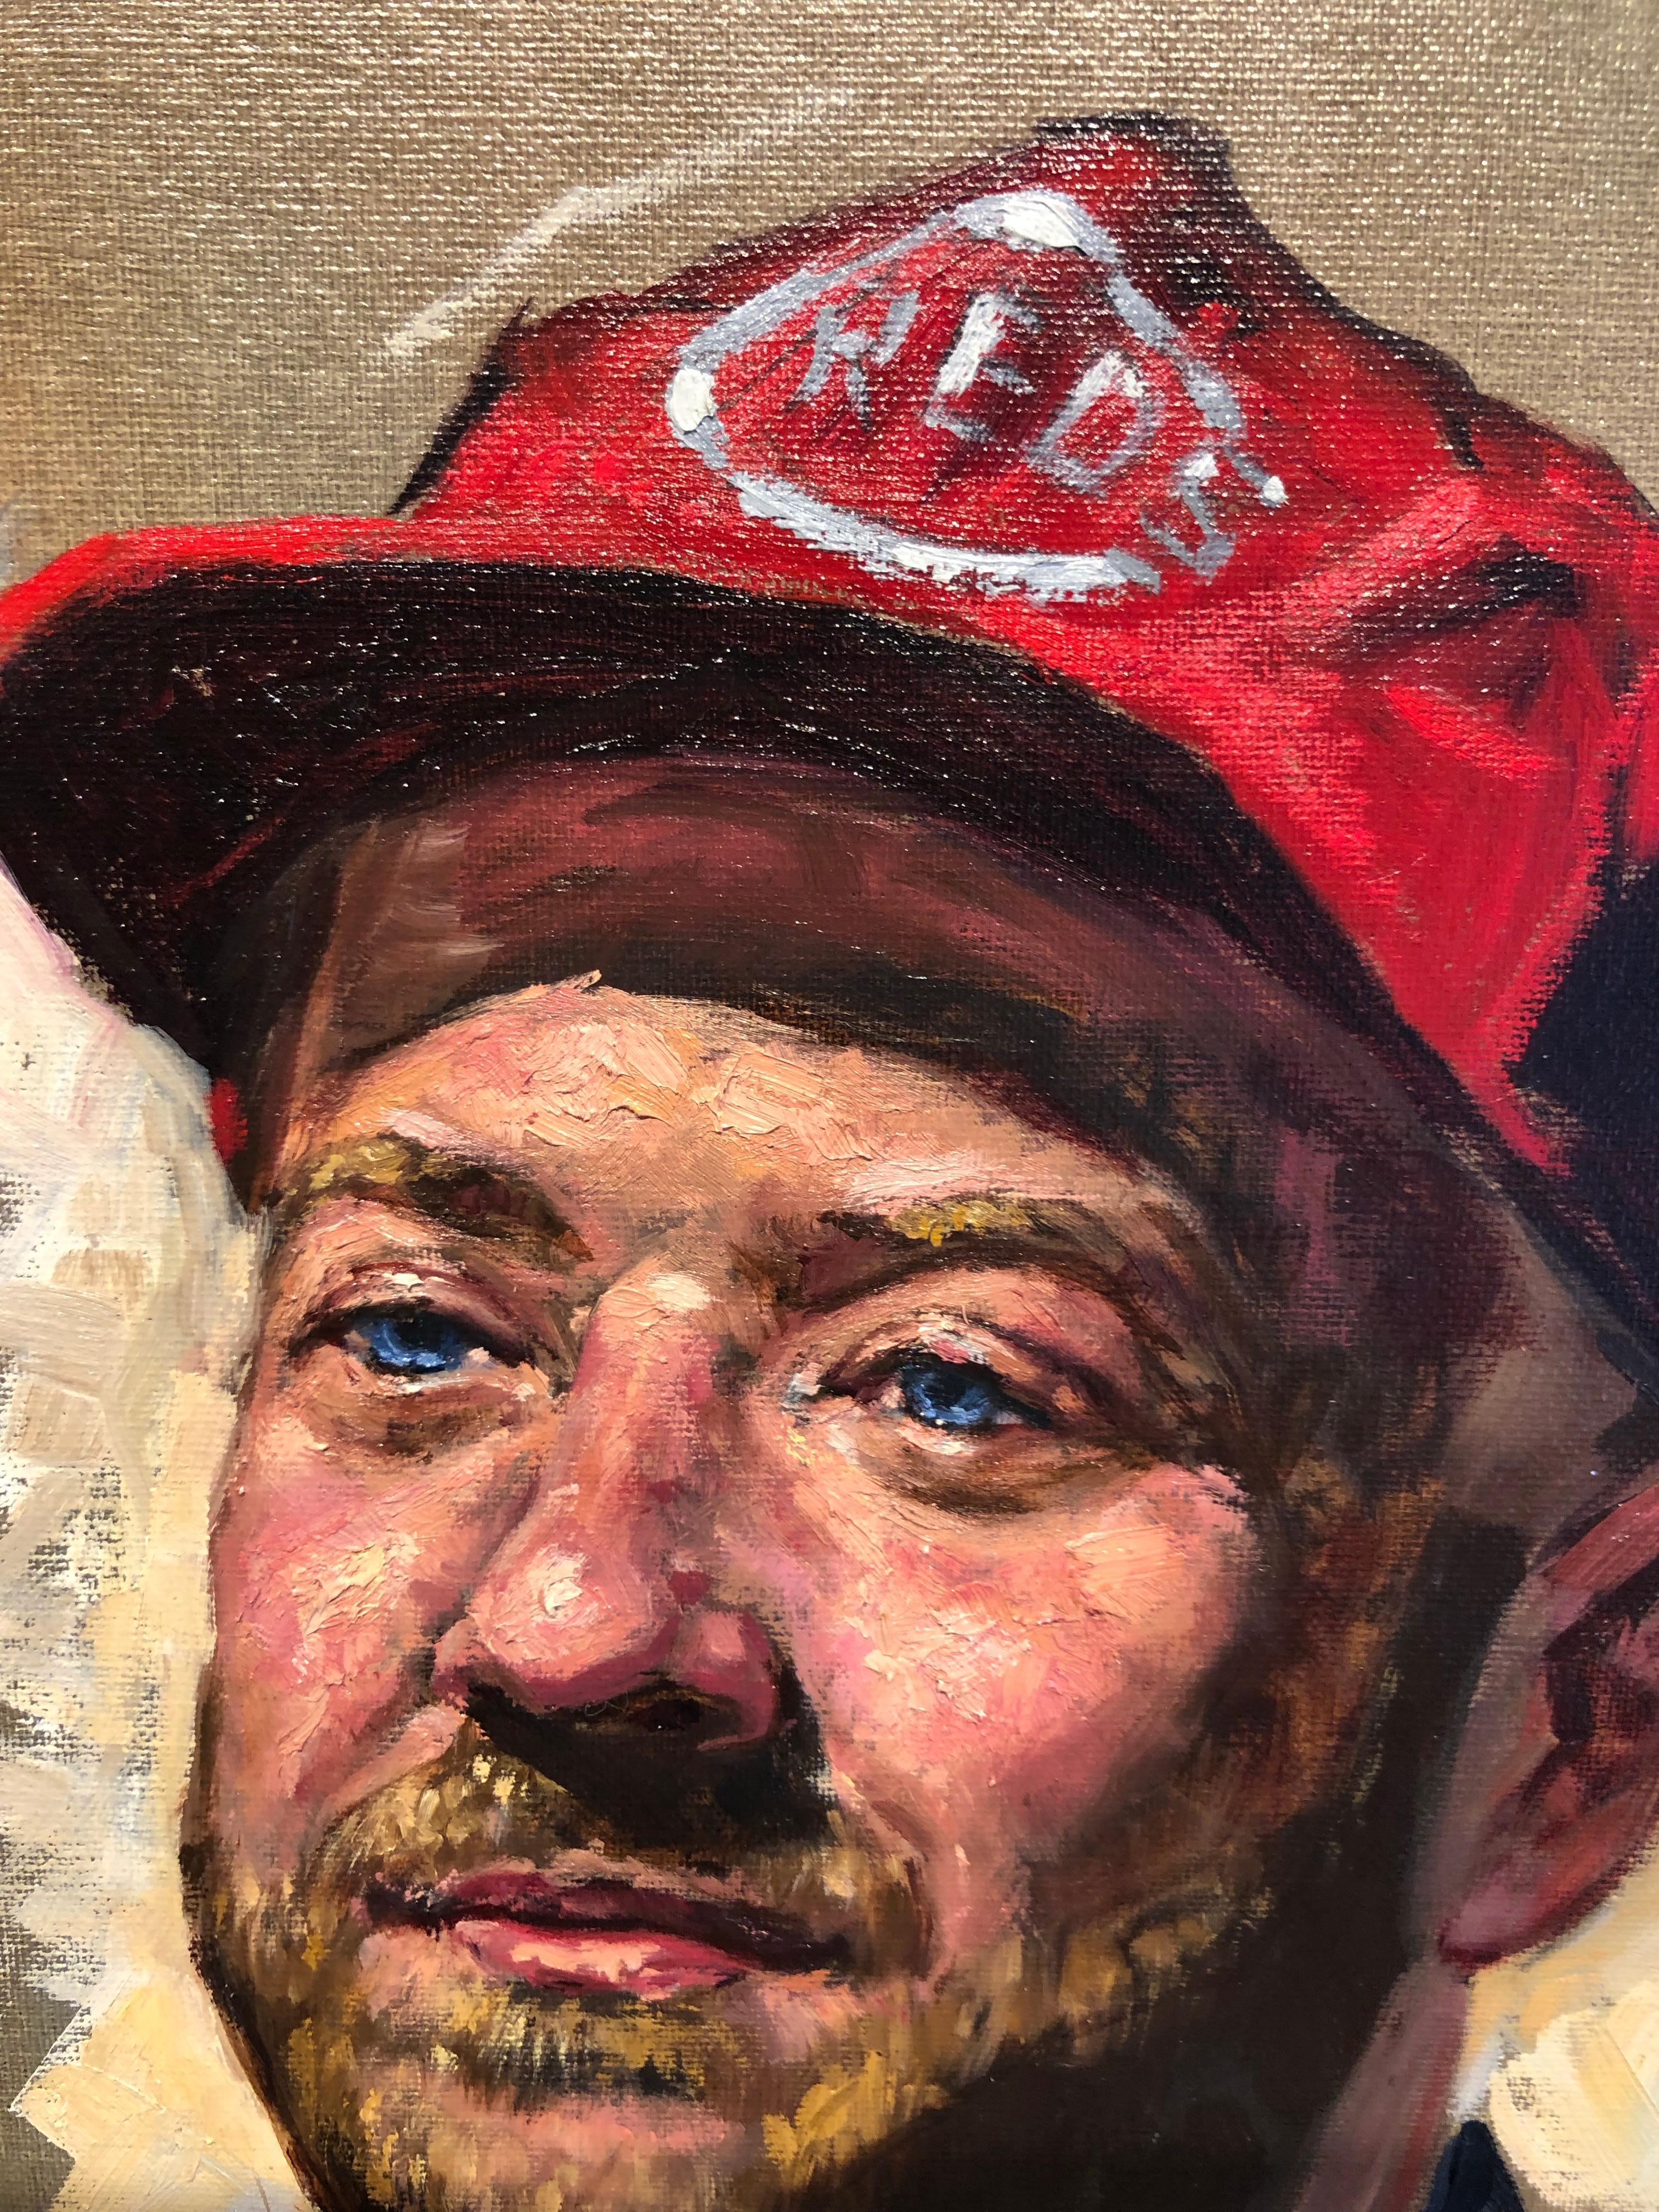 This painterly portrait of local bartender friend of the artist uses loose, active brush strokes, deft handling of color, and dramatic lighting to capture a moment of thoughtfulness in the expression.  Bright blue eyes stand out against the pink